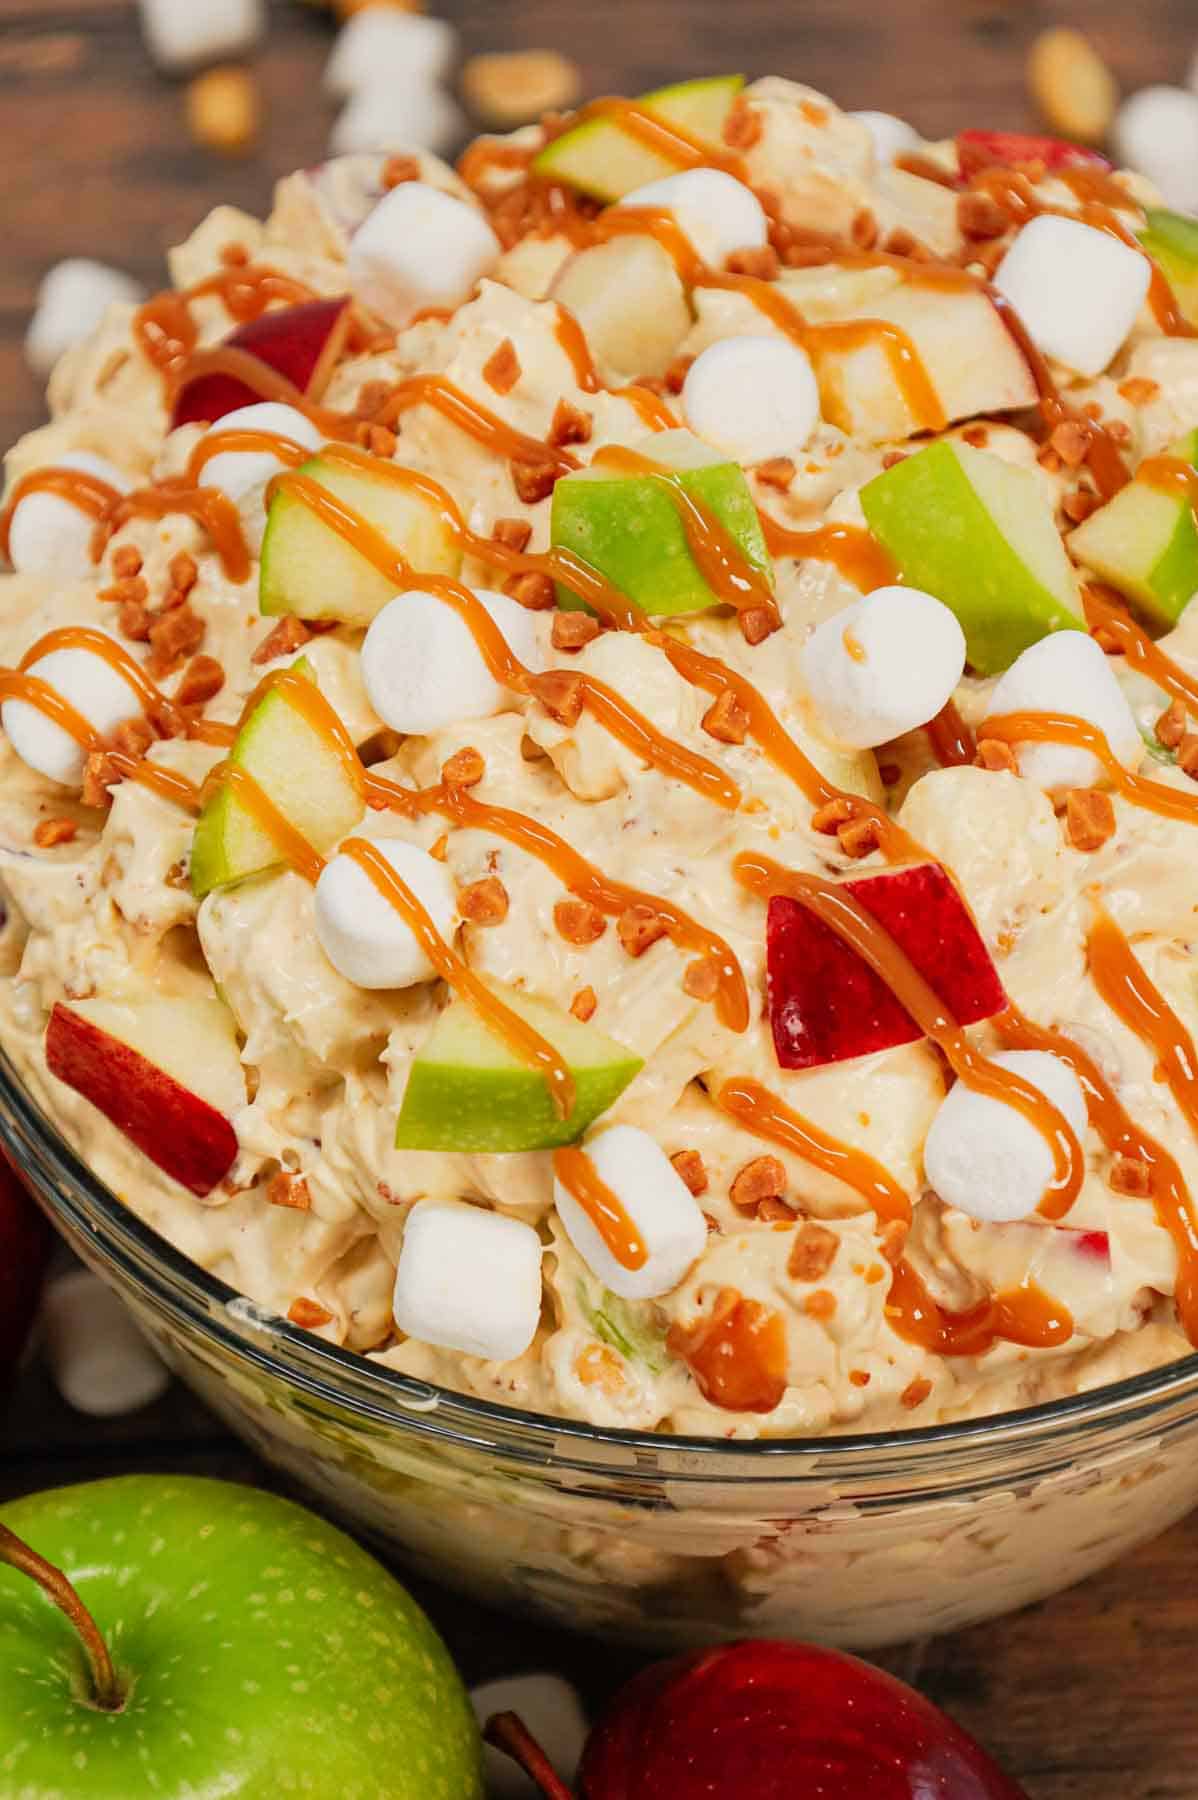 Taffy Apple Salad is a delicious no bake dessert recipe loaded with diced apples, peanuts, Skor bits and mini marshmallows all tossed in a Cool Whip and vanilla pudding mixture.